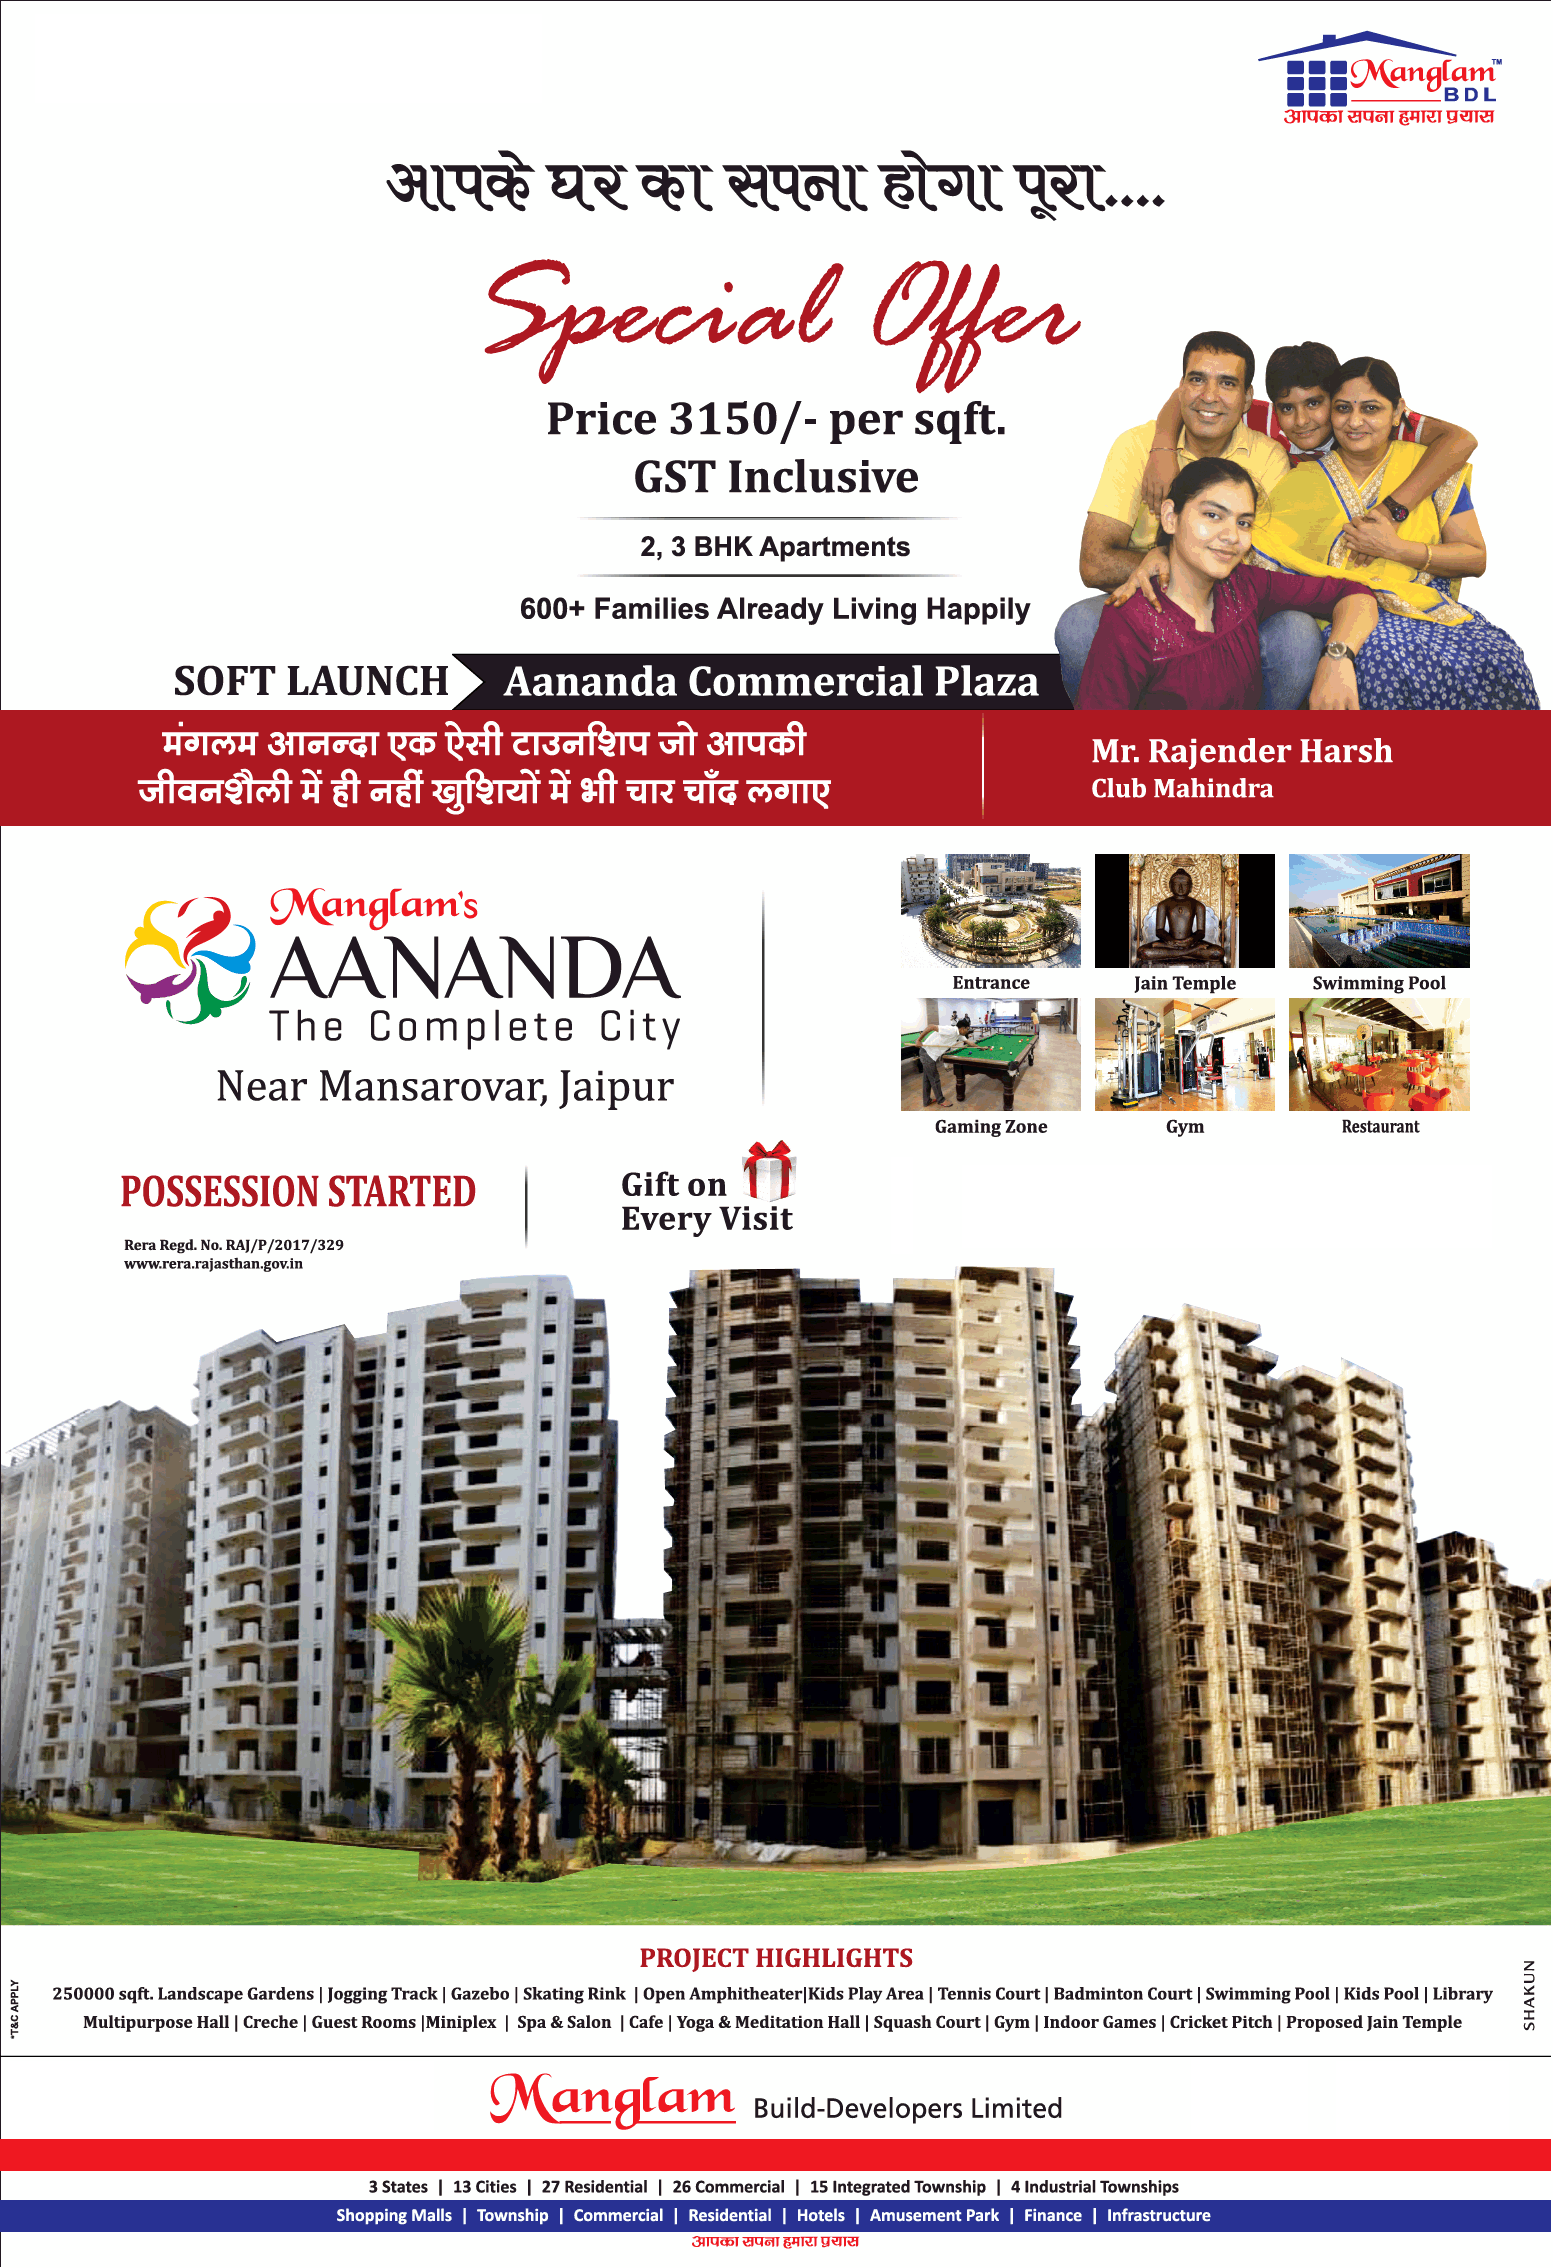 Avail special offer price for 2 & 3 bhk at Rs. 3150 per sq.ft. at Manglam Aananda in Jaipur Update